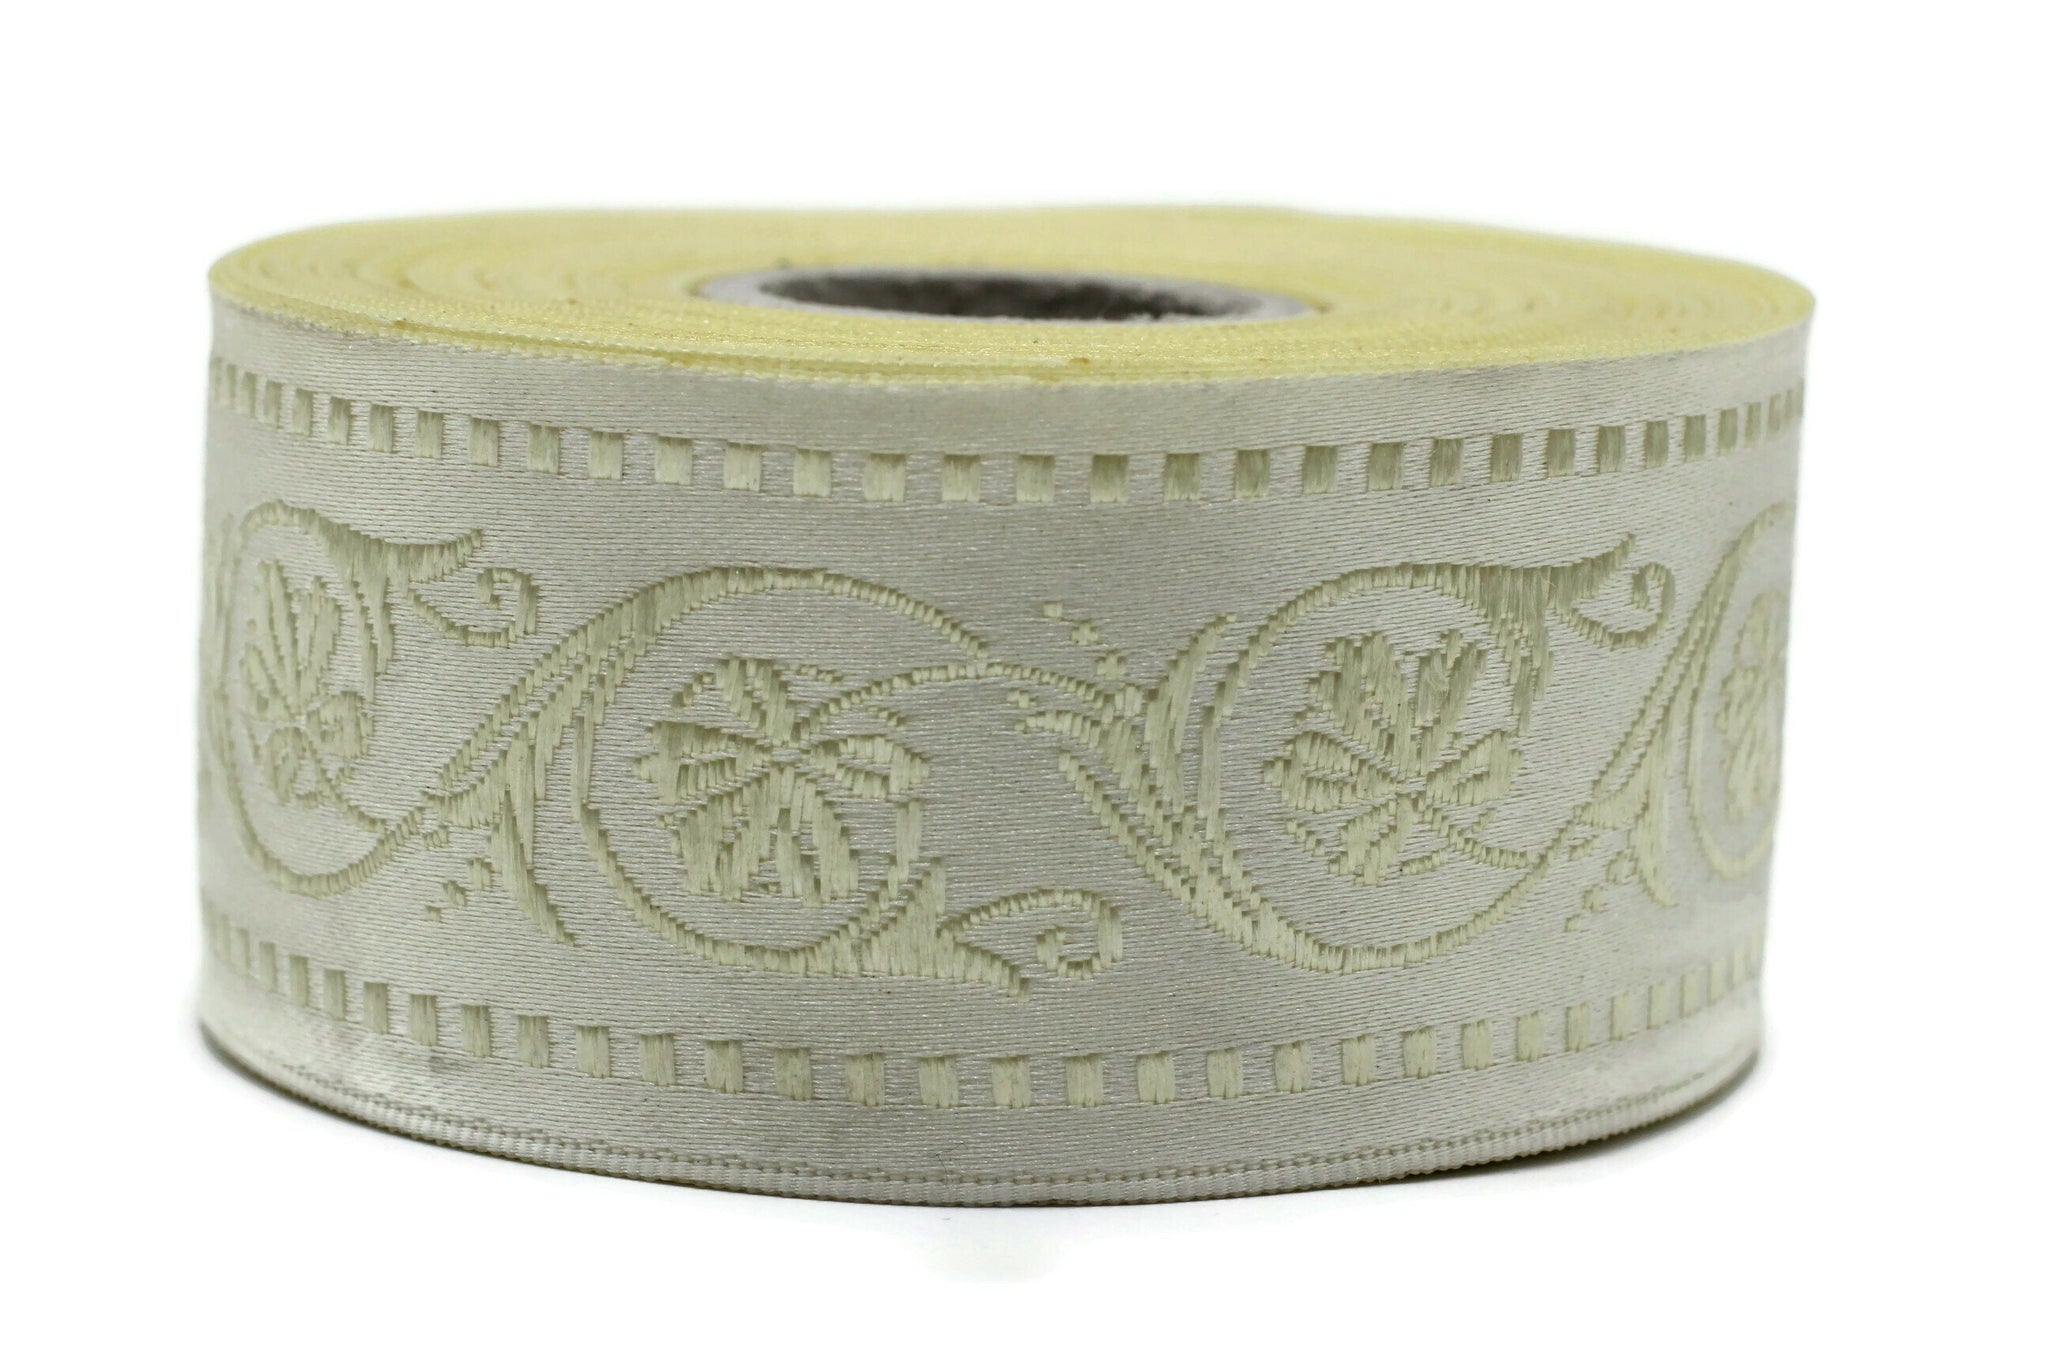 35 mm Beige Wildflower ribbon, Jacquard Trims (1.37 inches), Vintage Ribbons, Decorative Ribbons, Sewing Trim, Trimming, CNK08